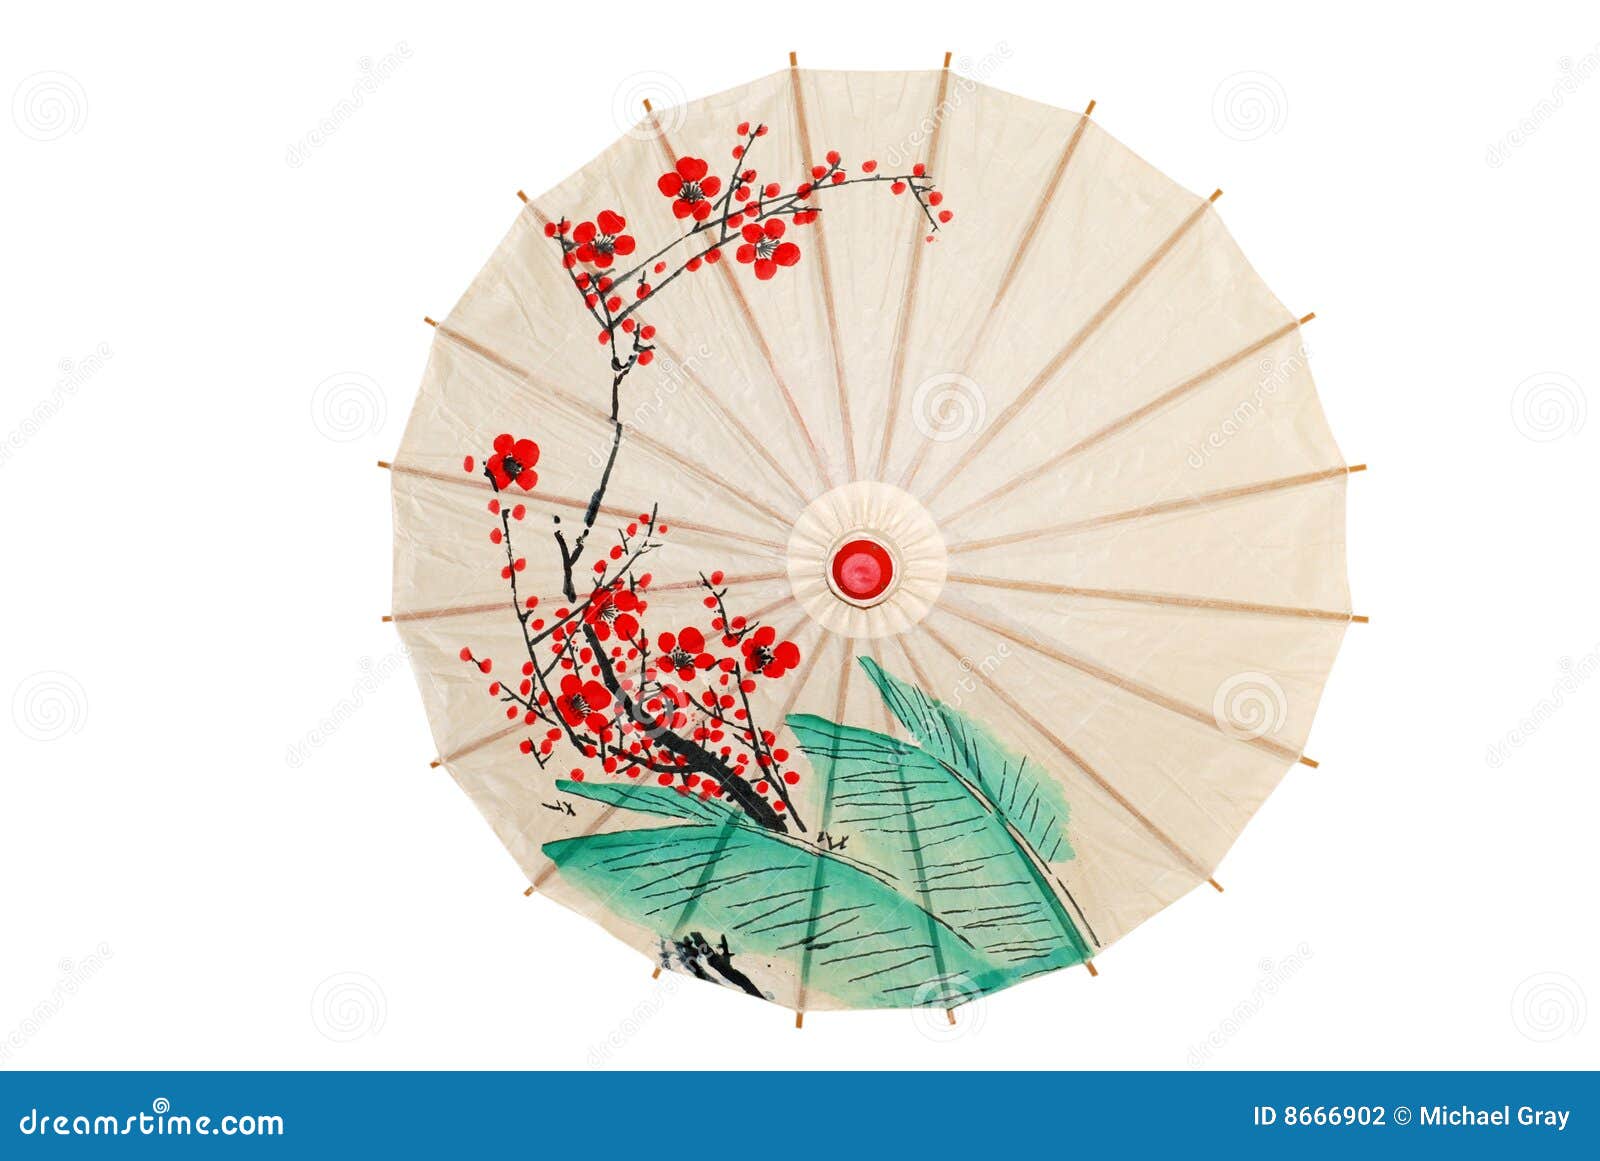  oriental umbrella with red flowers